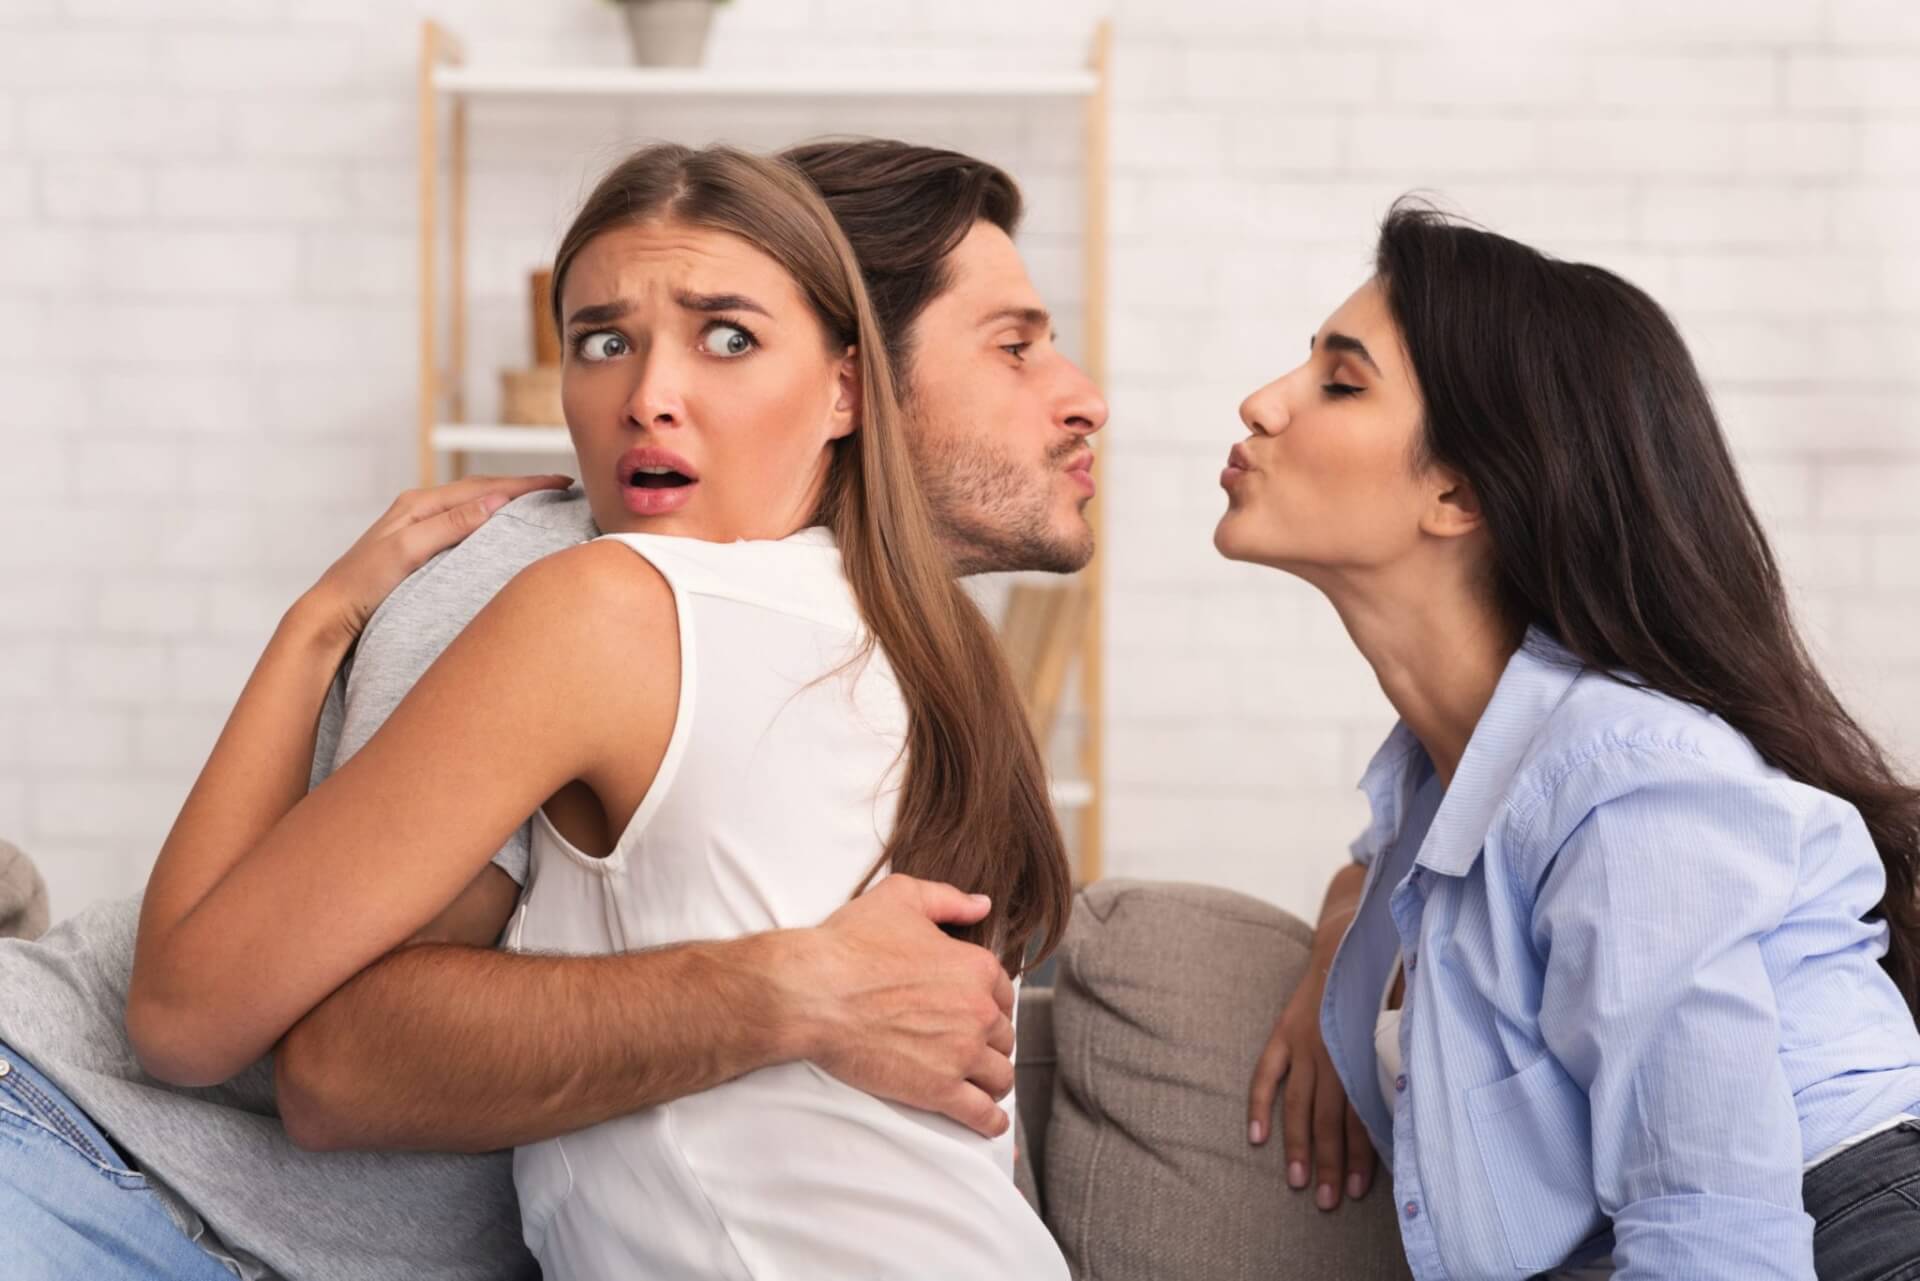 How Adultery Affects Florida Divorce, Child Custody, Alimony, and Property Division